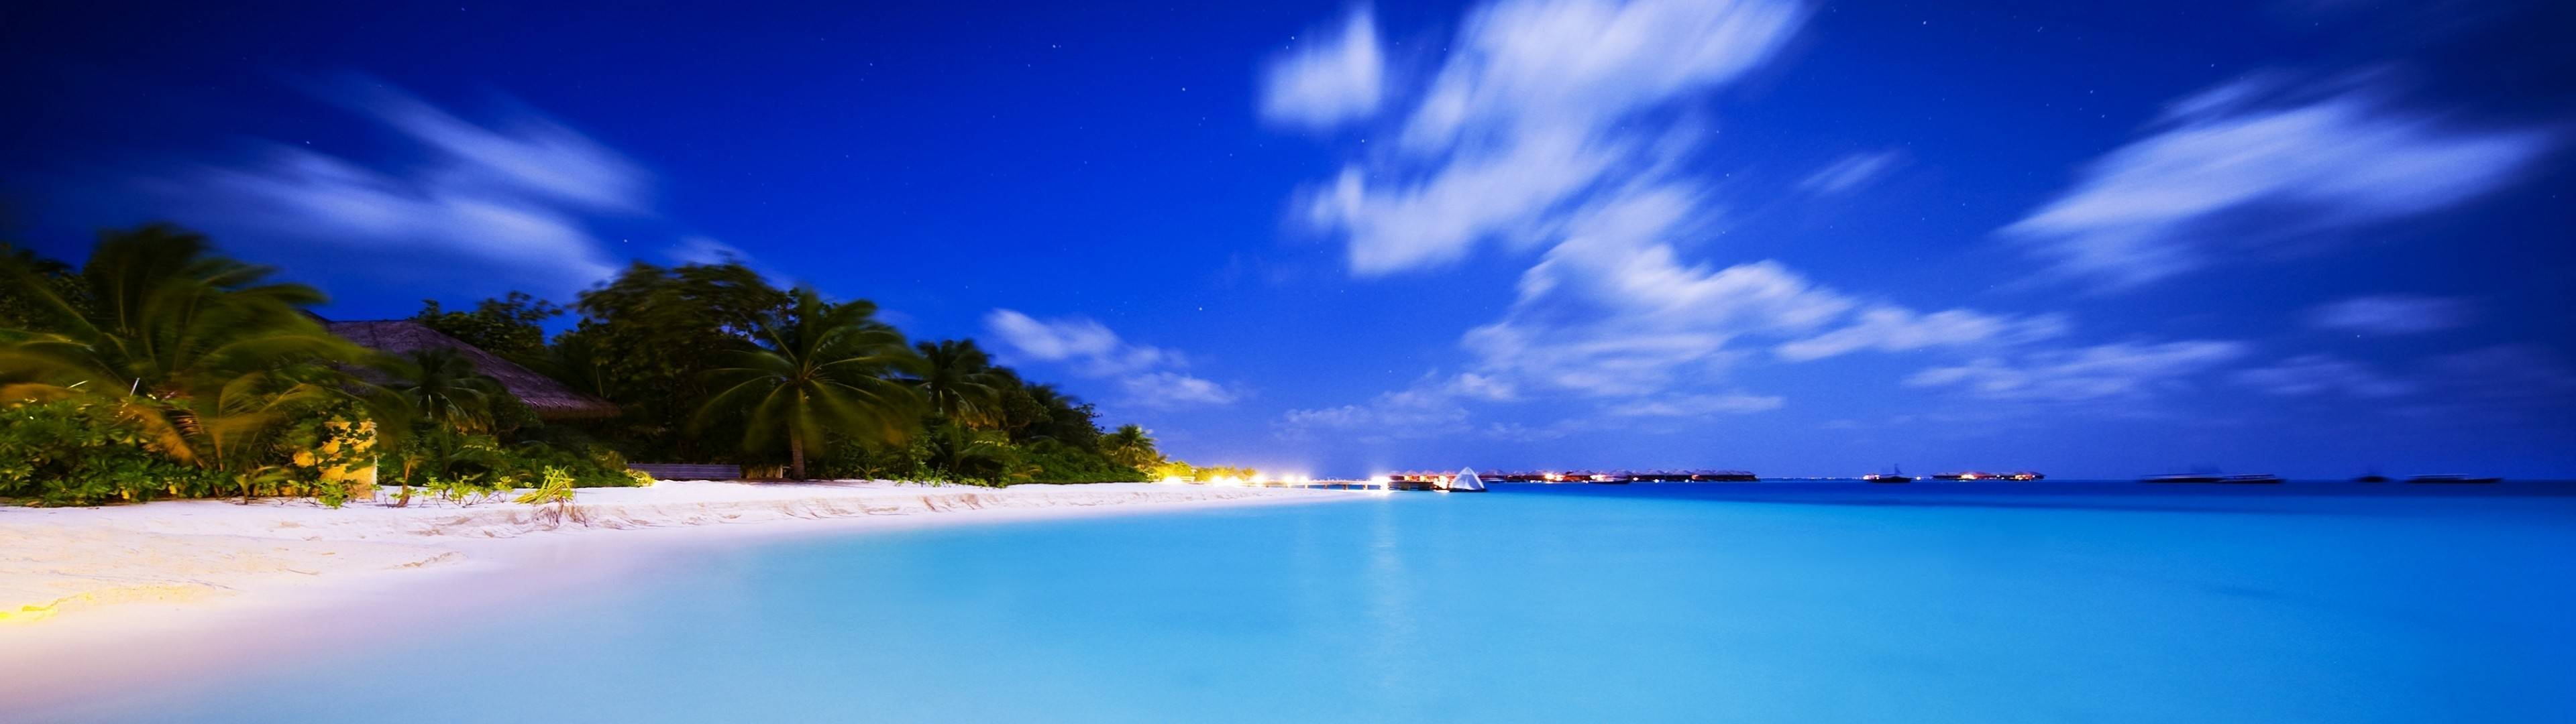 3840 x 1080 wallpapers #7